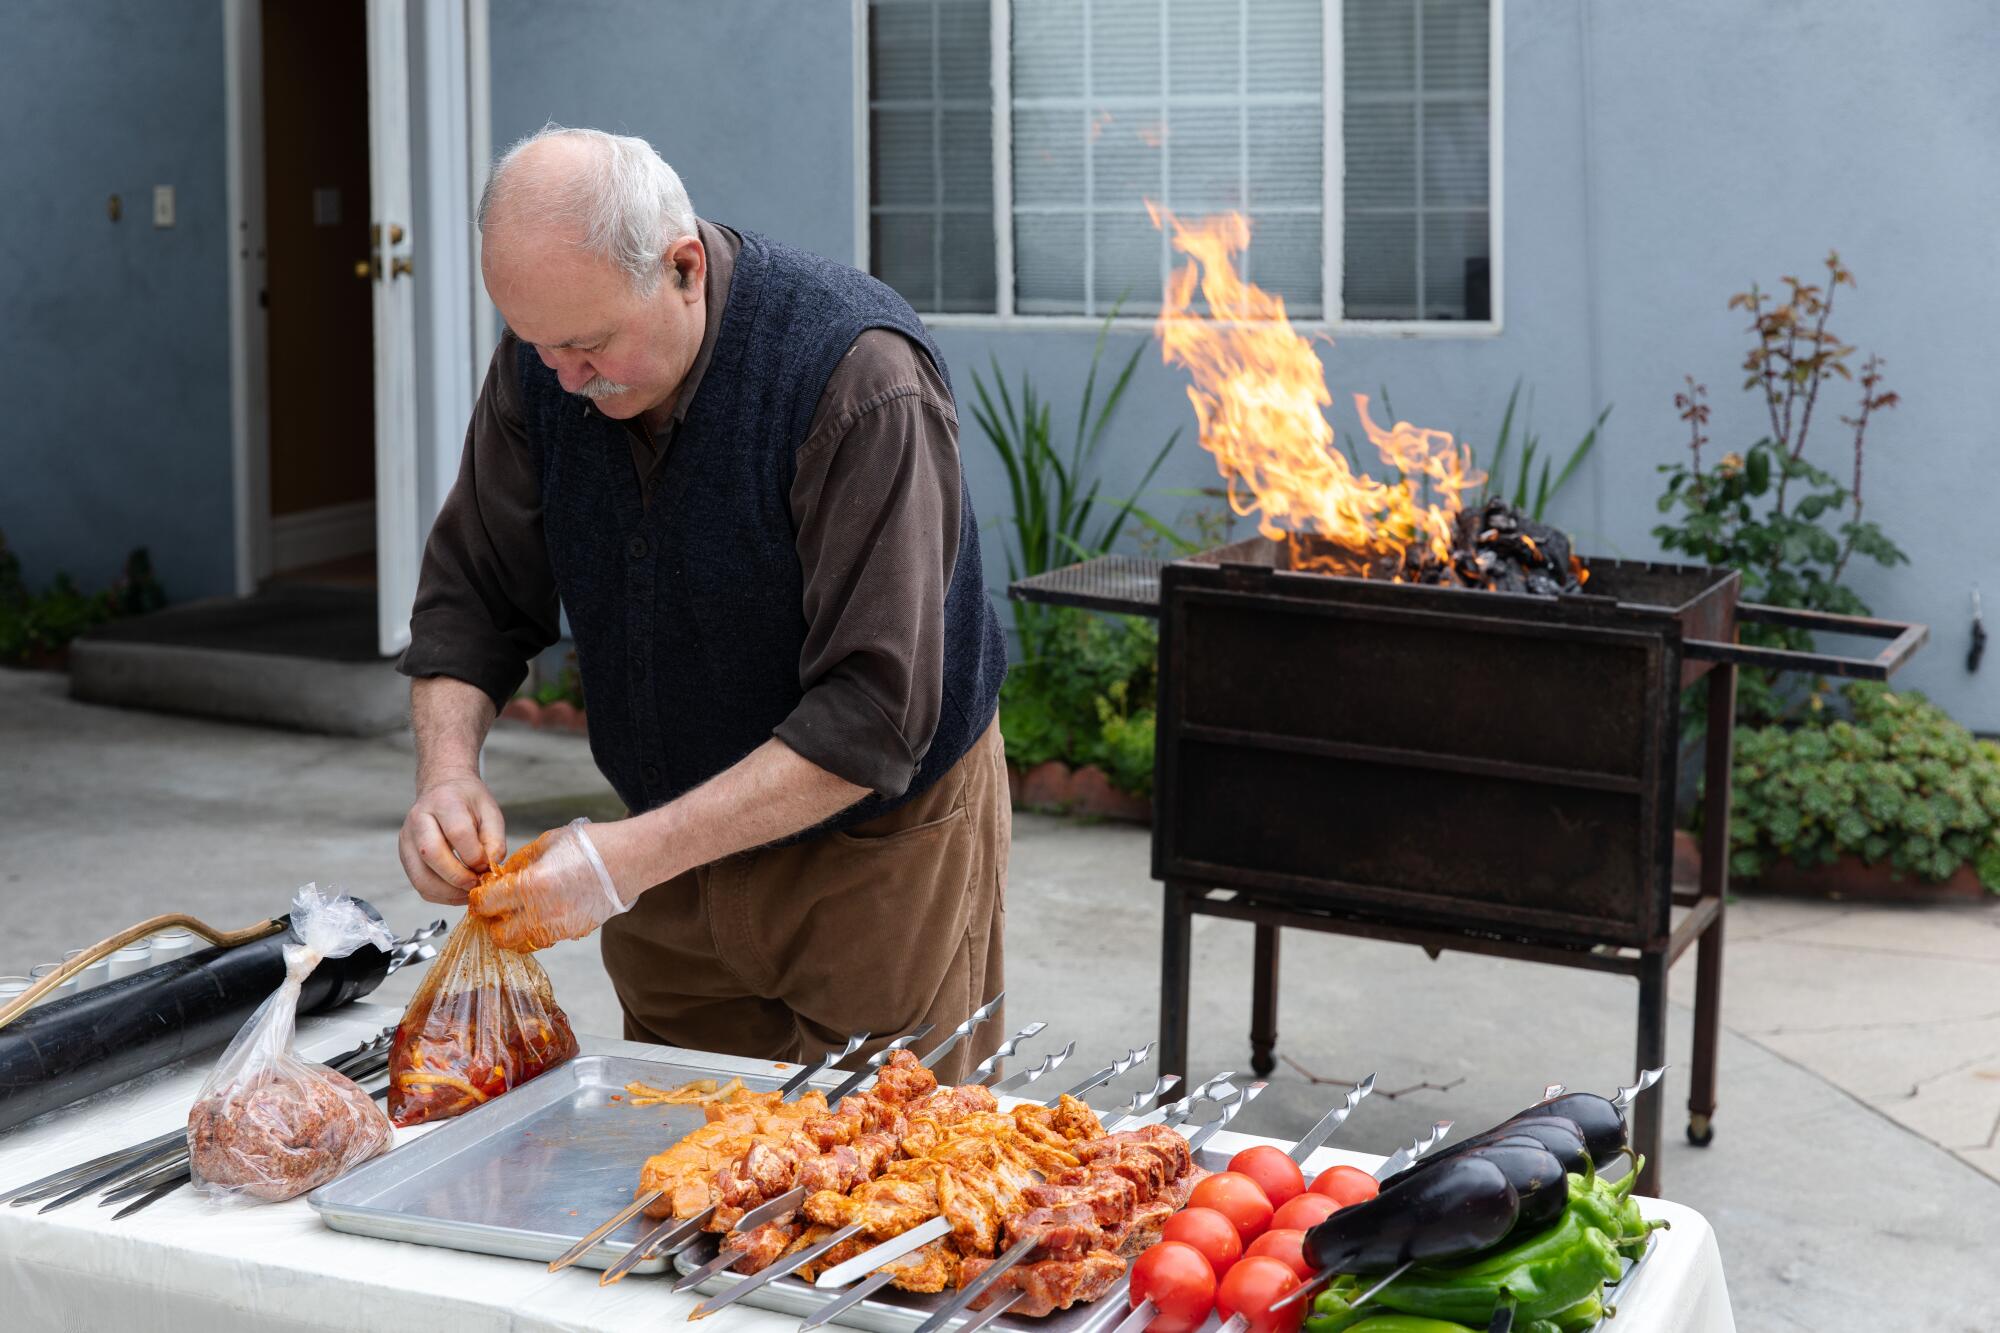 Alex Khachoyan prepares meat for grilling with a flaming grill behind him in his backyard.